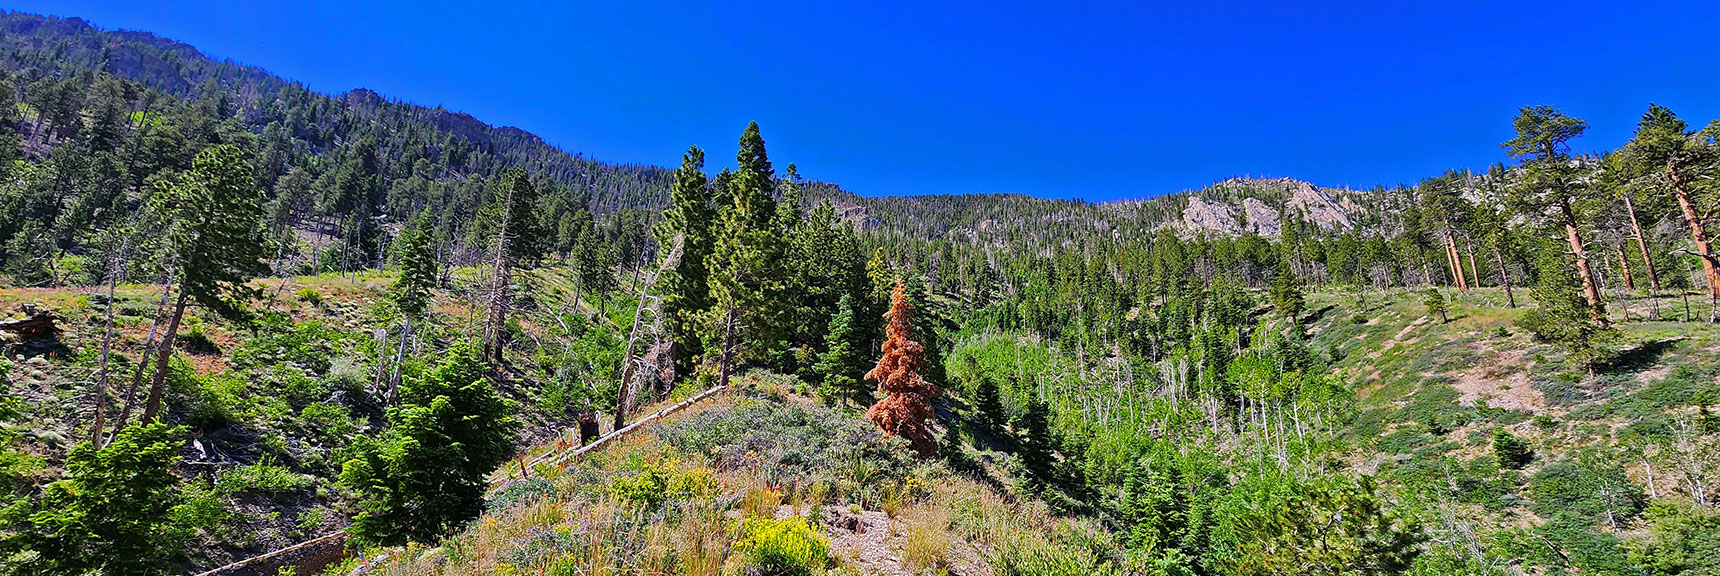 Ridge Narrows, Burn Area Gives Way to Pine Forest, and a Faint Trail | Fletcher View Ridge | Mt Charleston Wilderness, Nevada